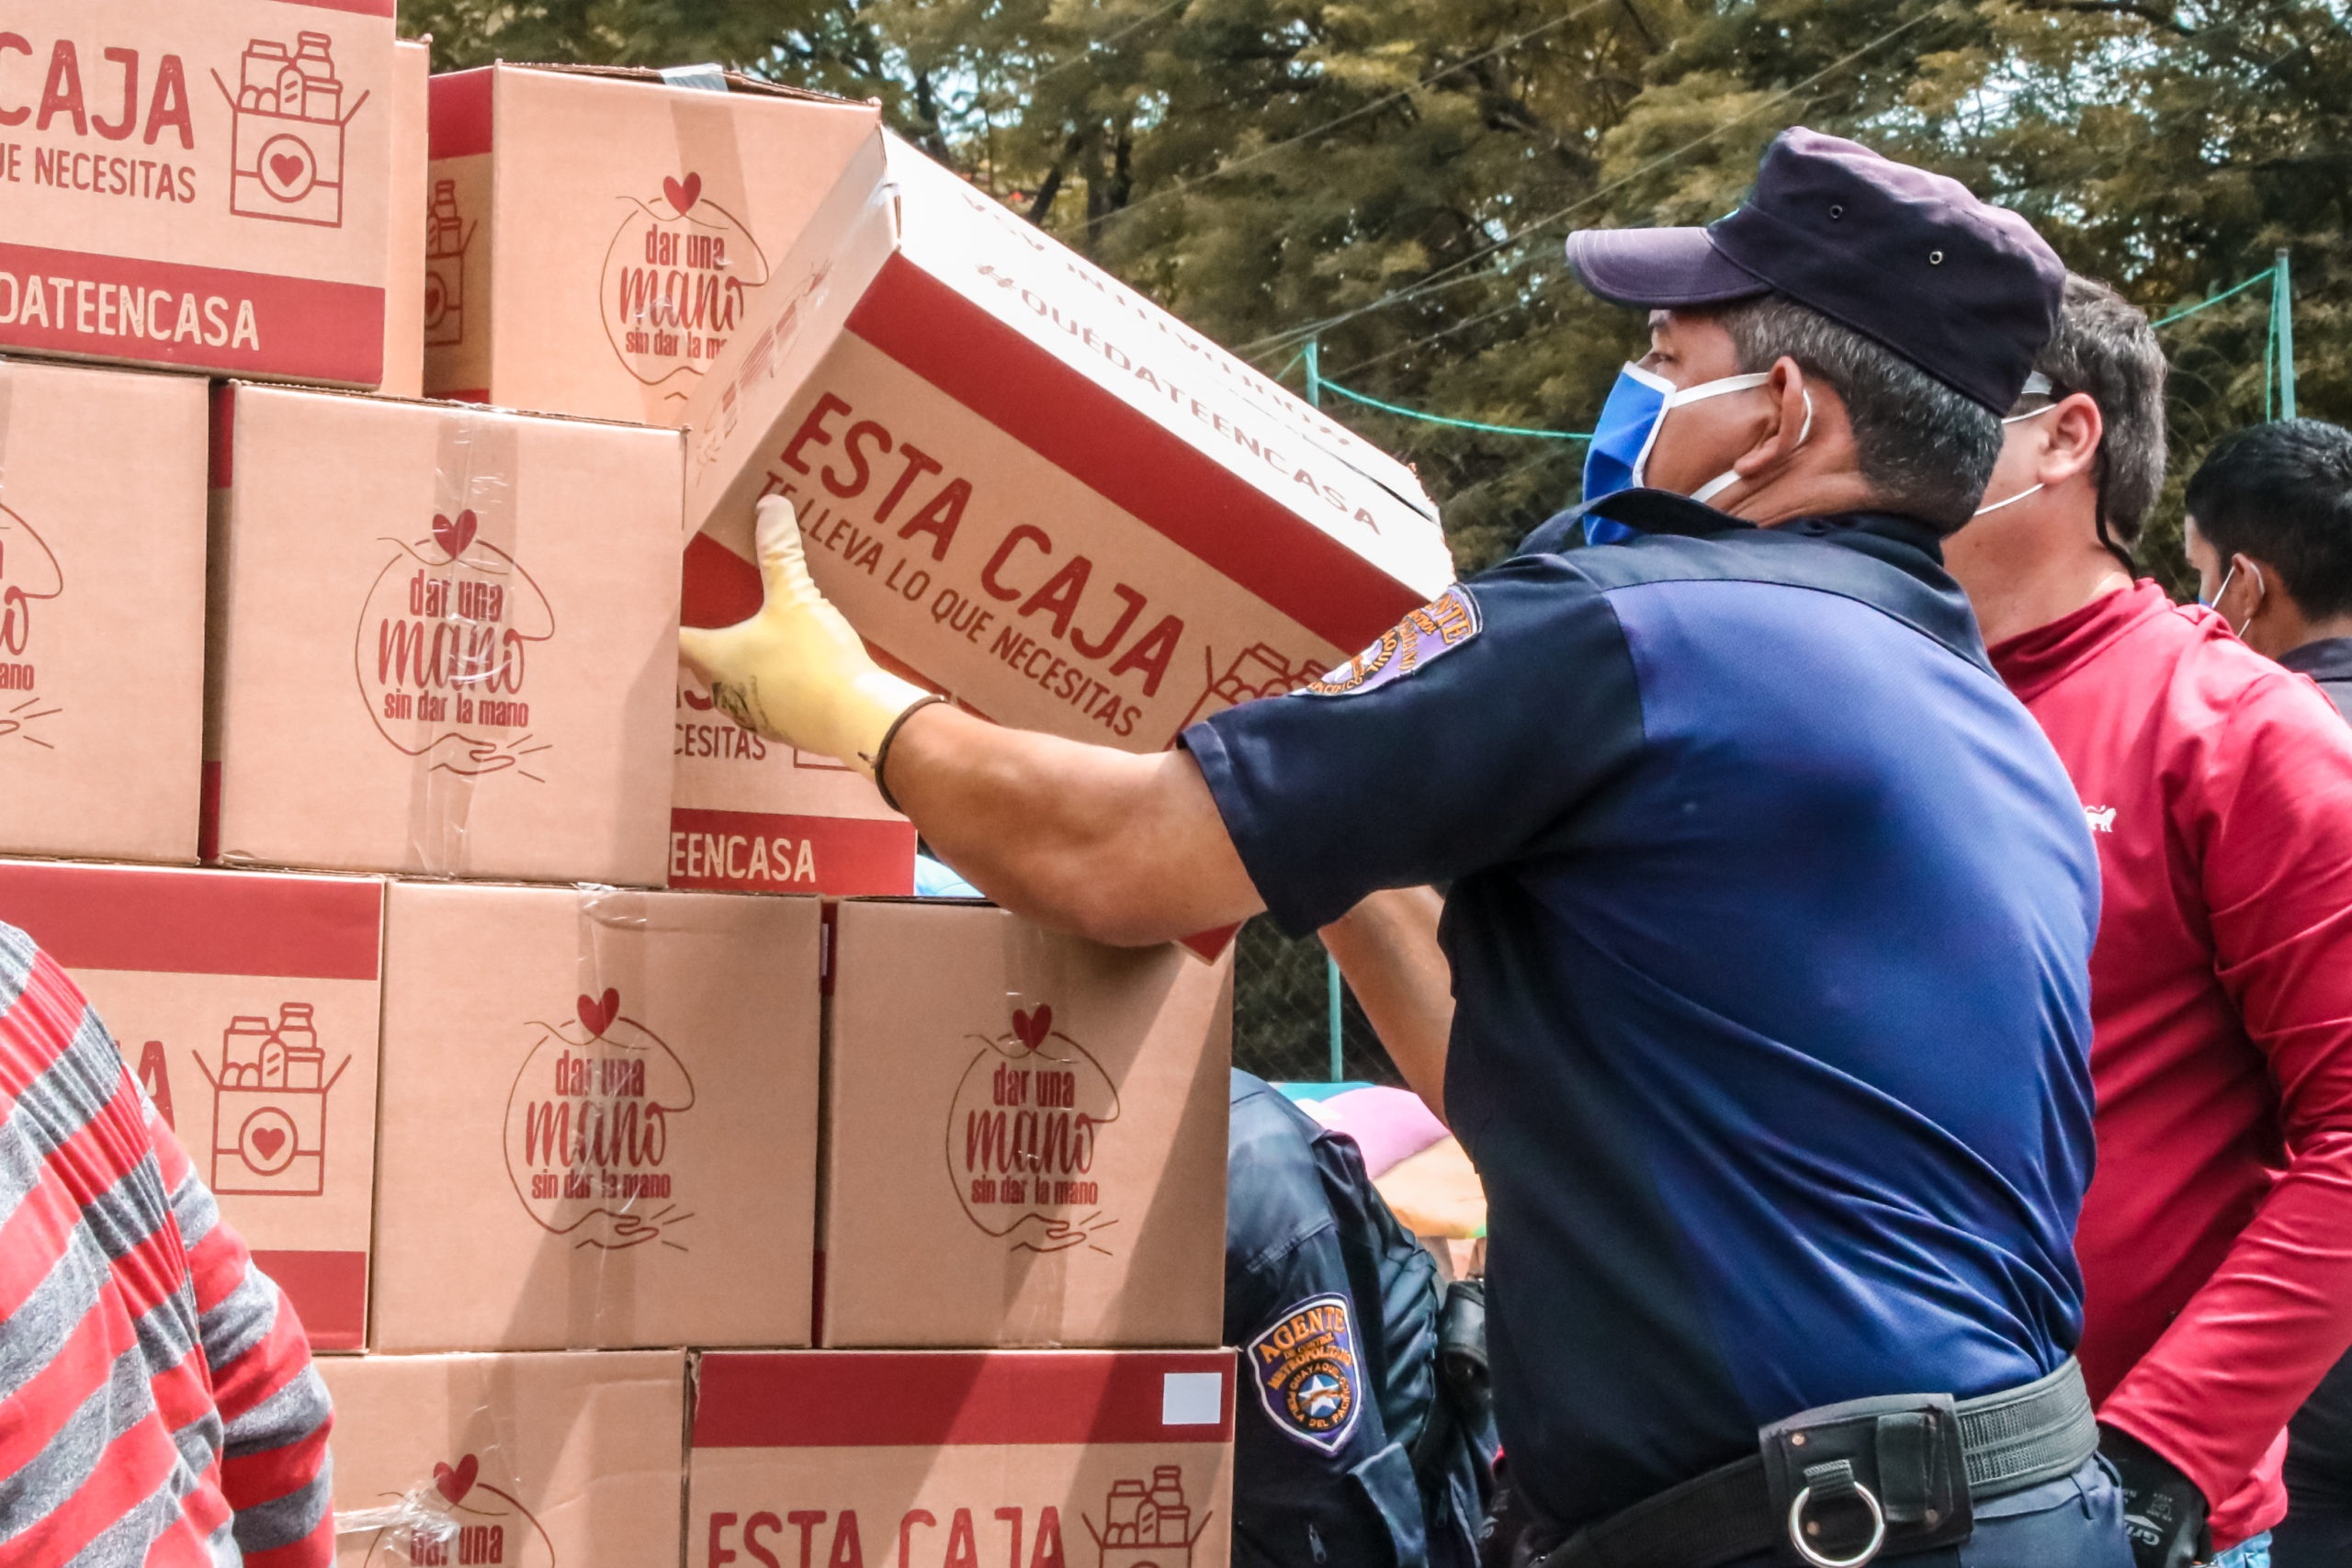 The mayor went on war footing. This is the anatomy of the war plan: It beings with a mantra: “La unica mission es vivir y comer.” – the only mission is to save lives and ensure food access—“Everything else is secondary.”